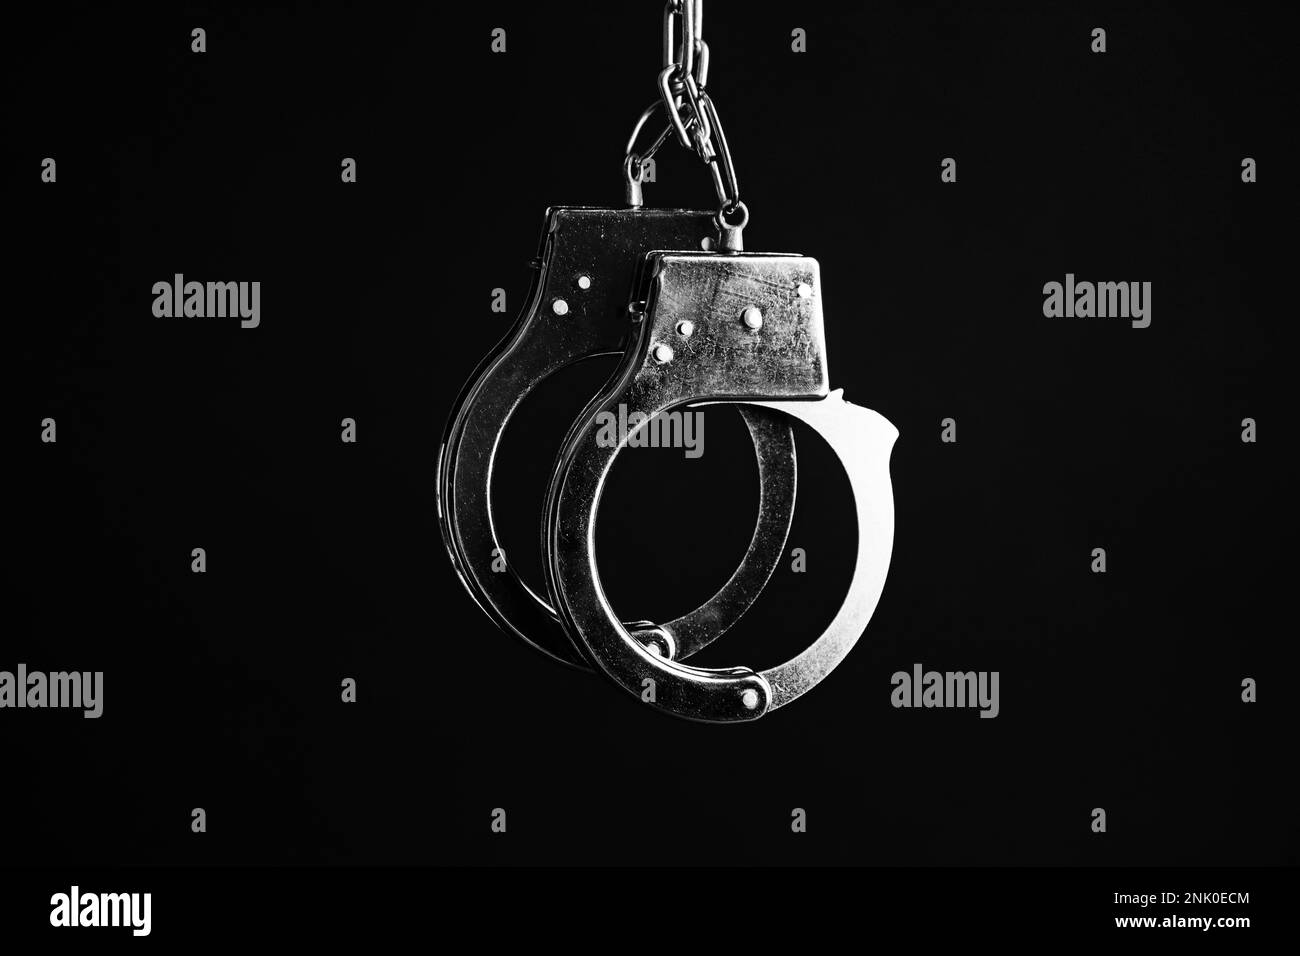 Classic chain handcuffs hanging on black background Stock Photo